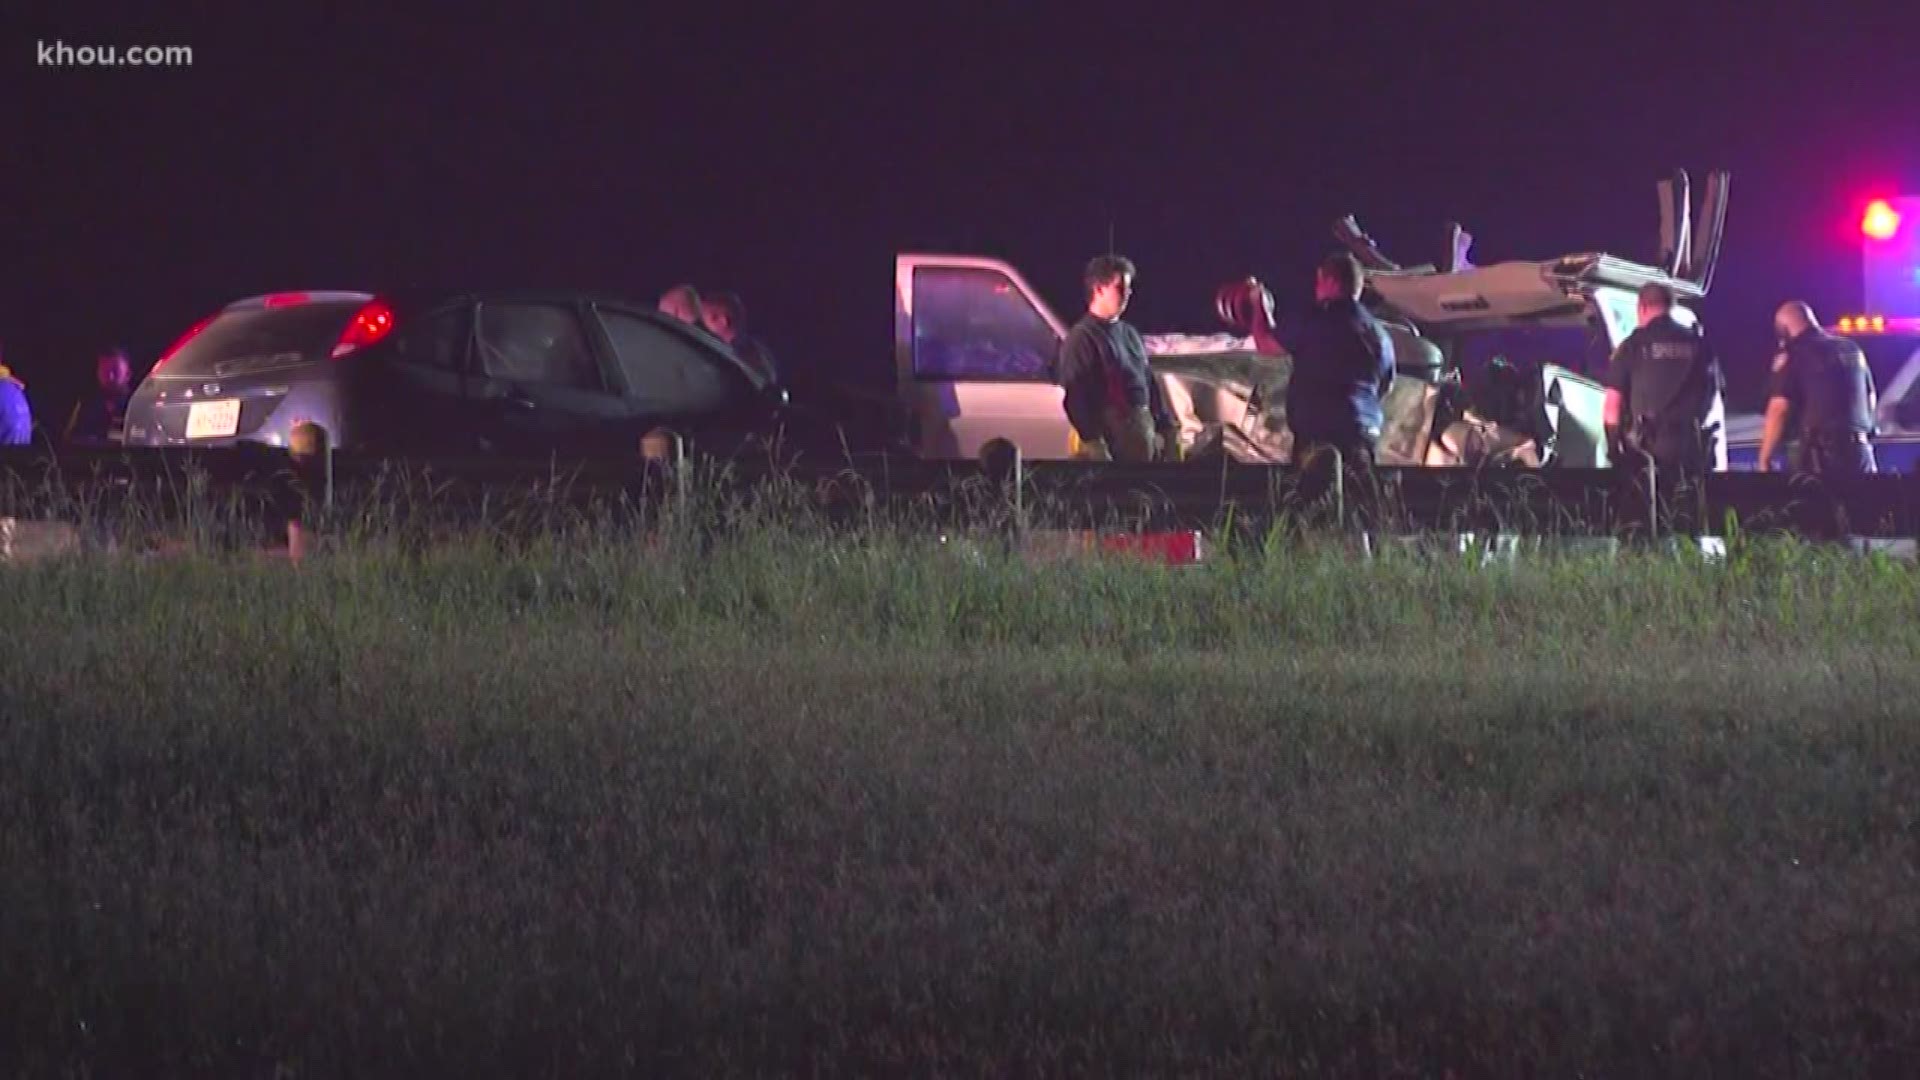 Deputies in Crosby are investigating a wrong-way crash that killed a driver and sent multiple people to the hospital overnight.